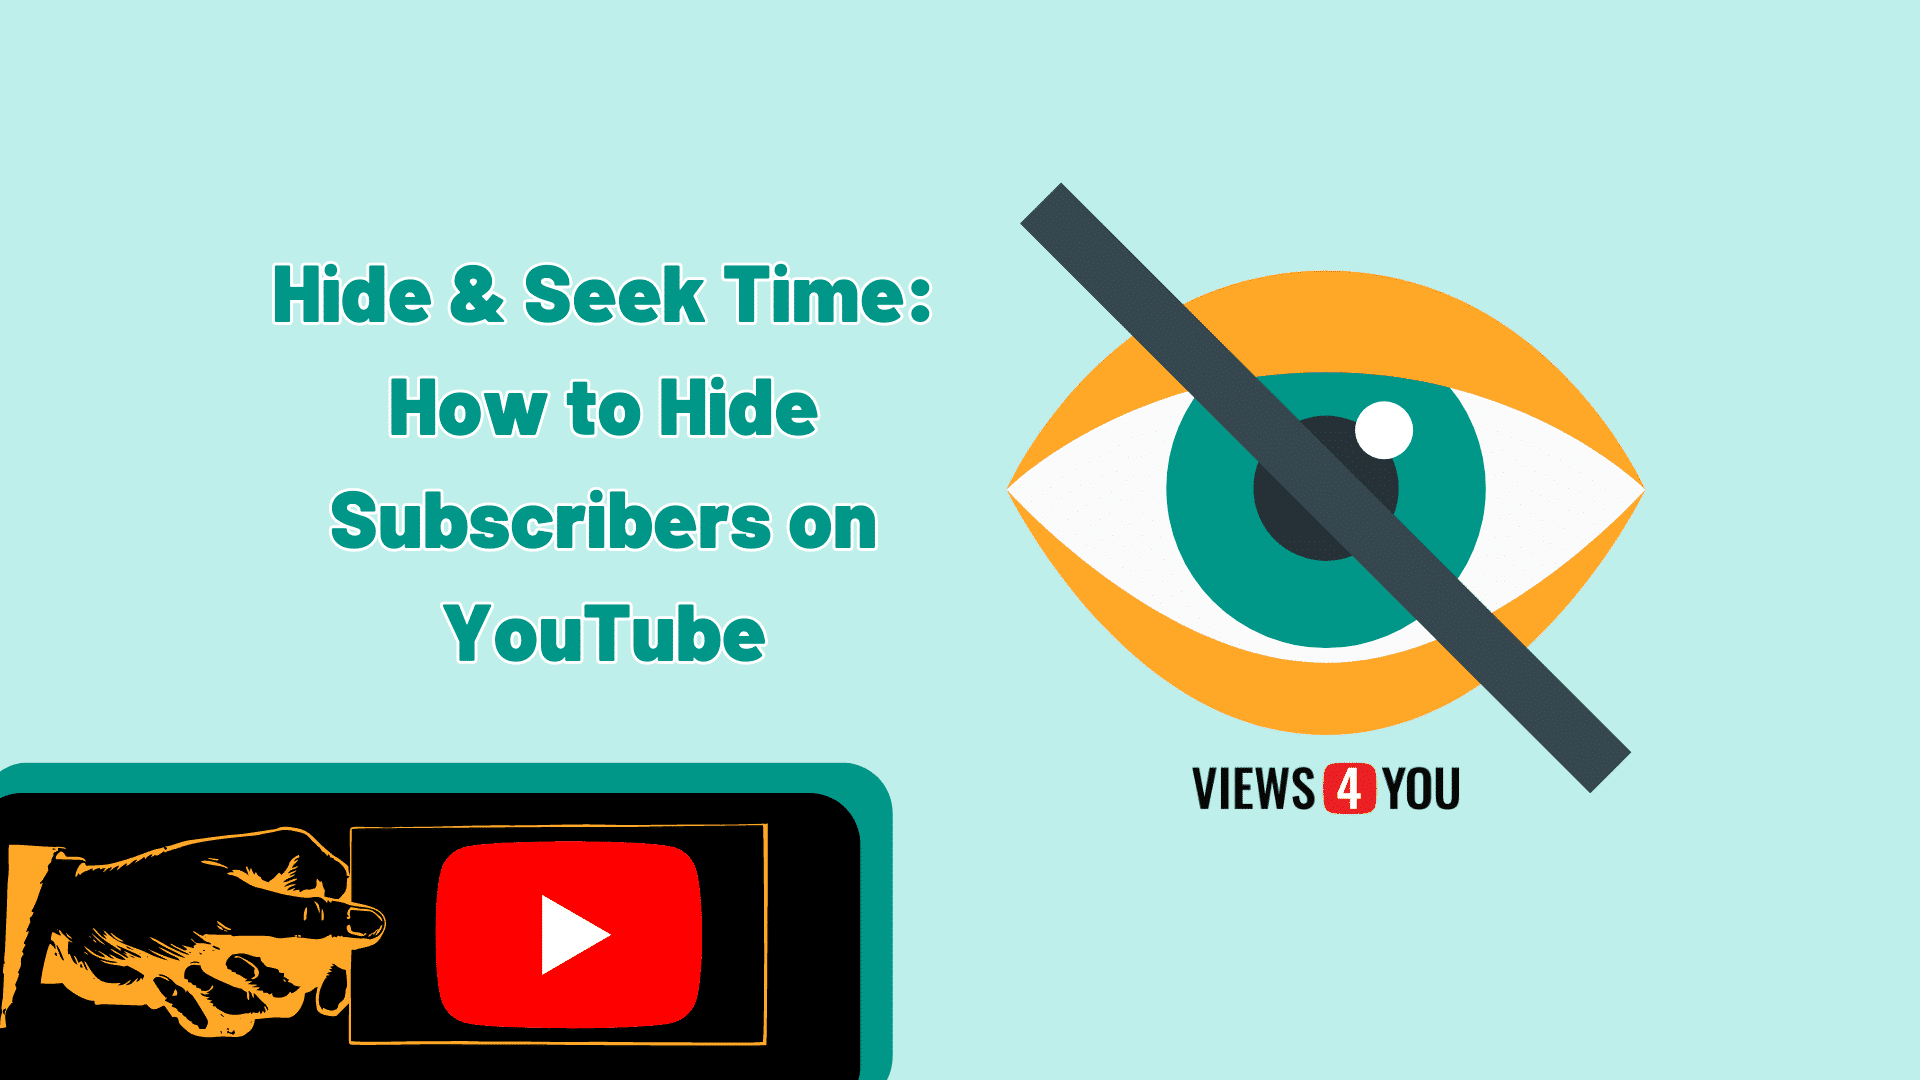 Hide & Seek Time: How to Hide Subscribers on YouTube